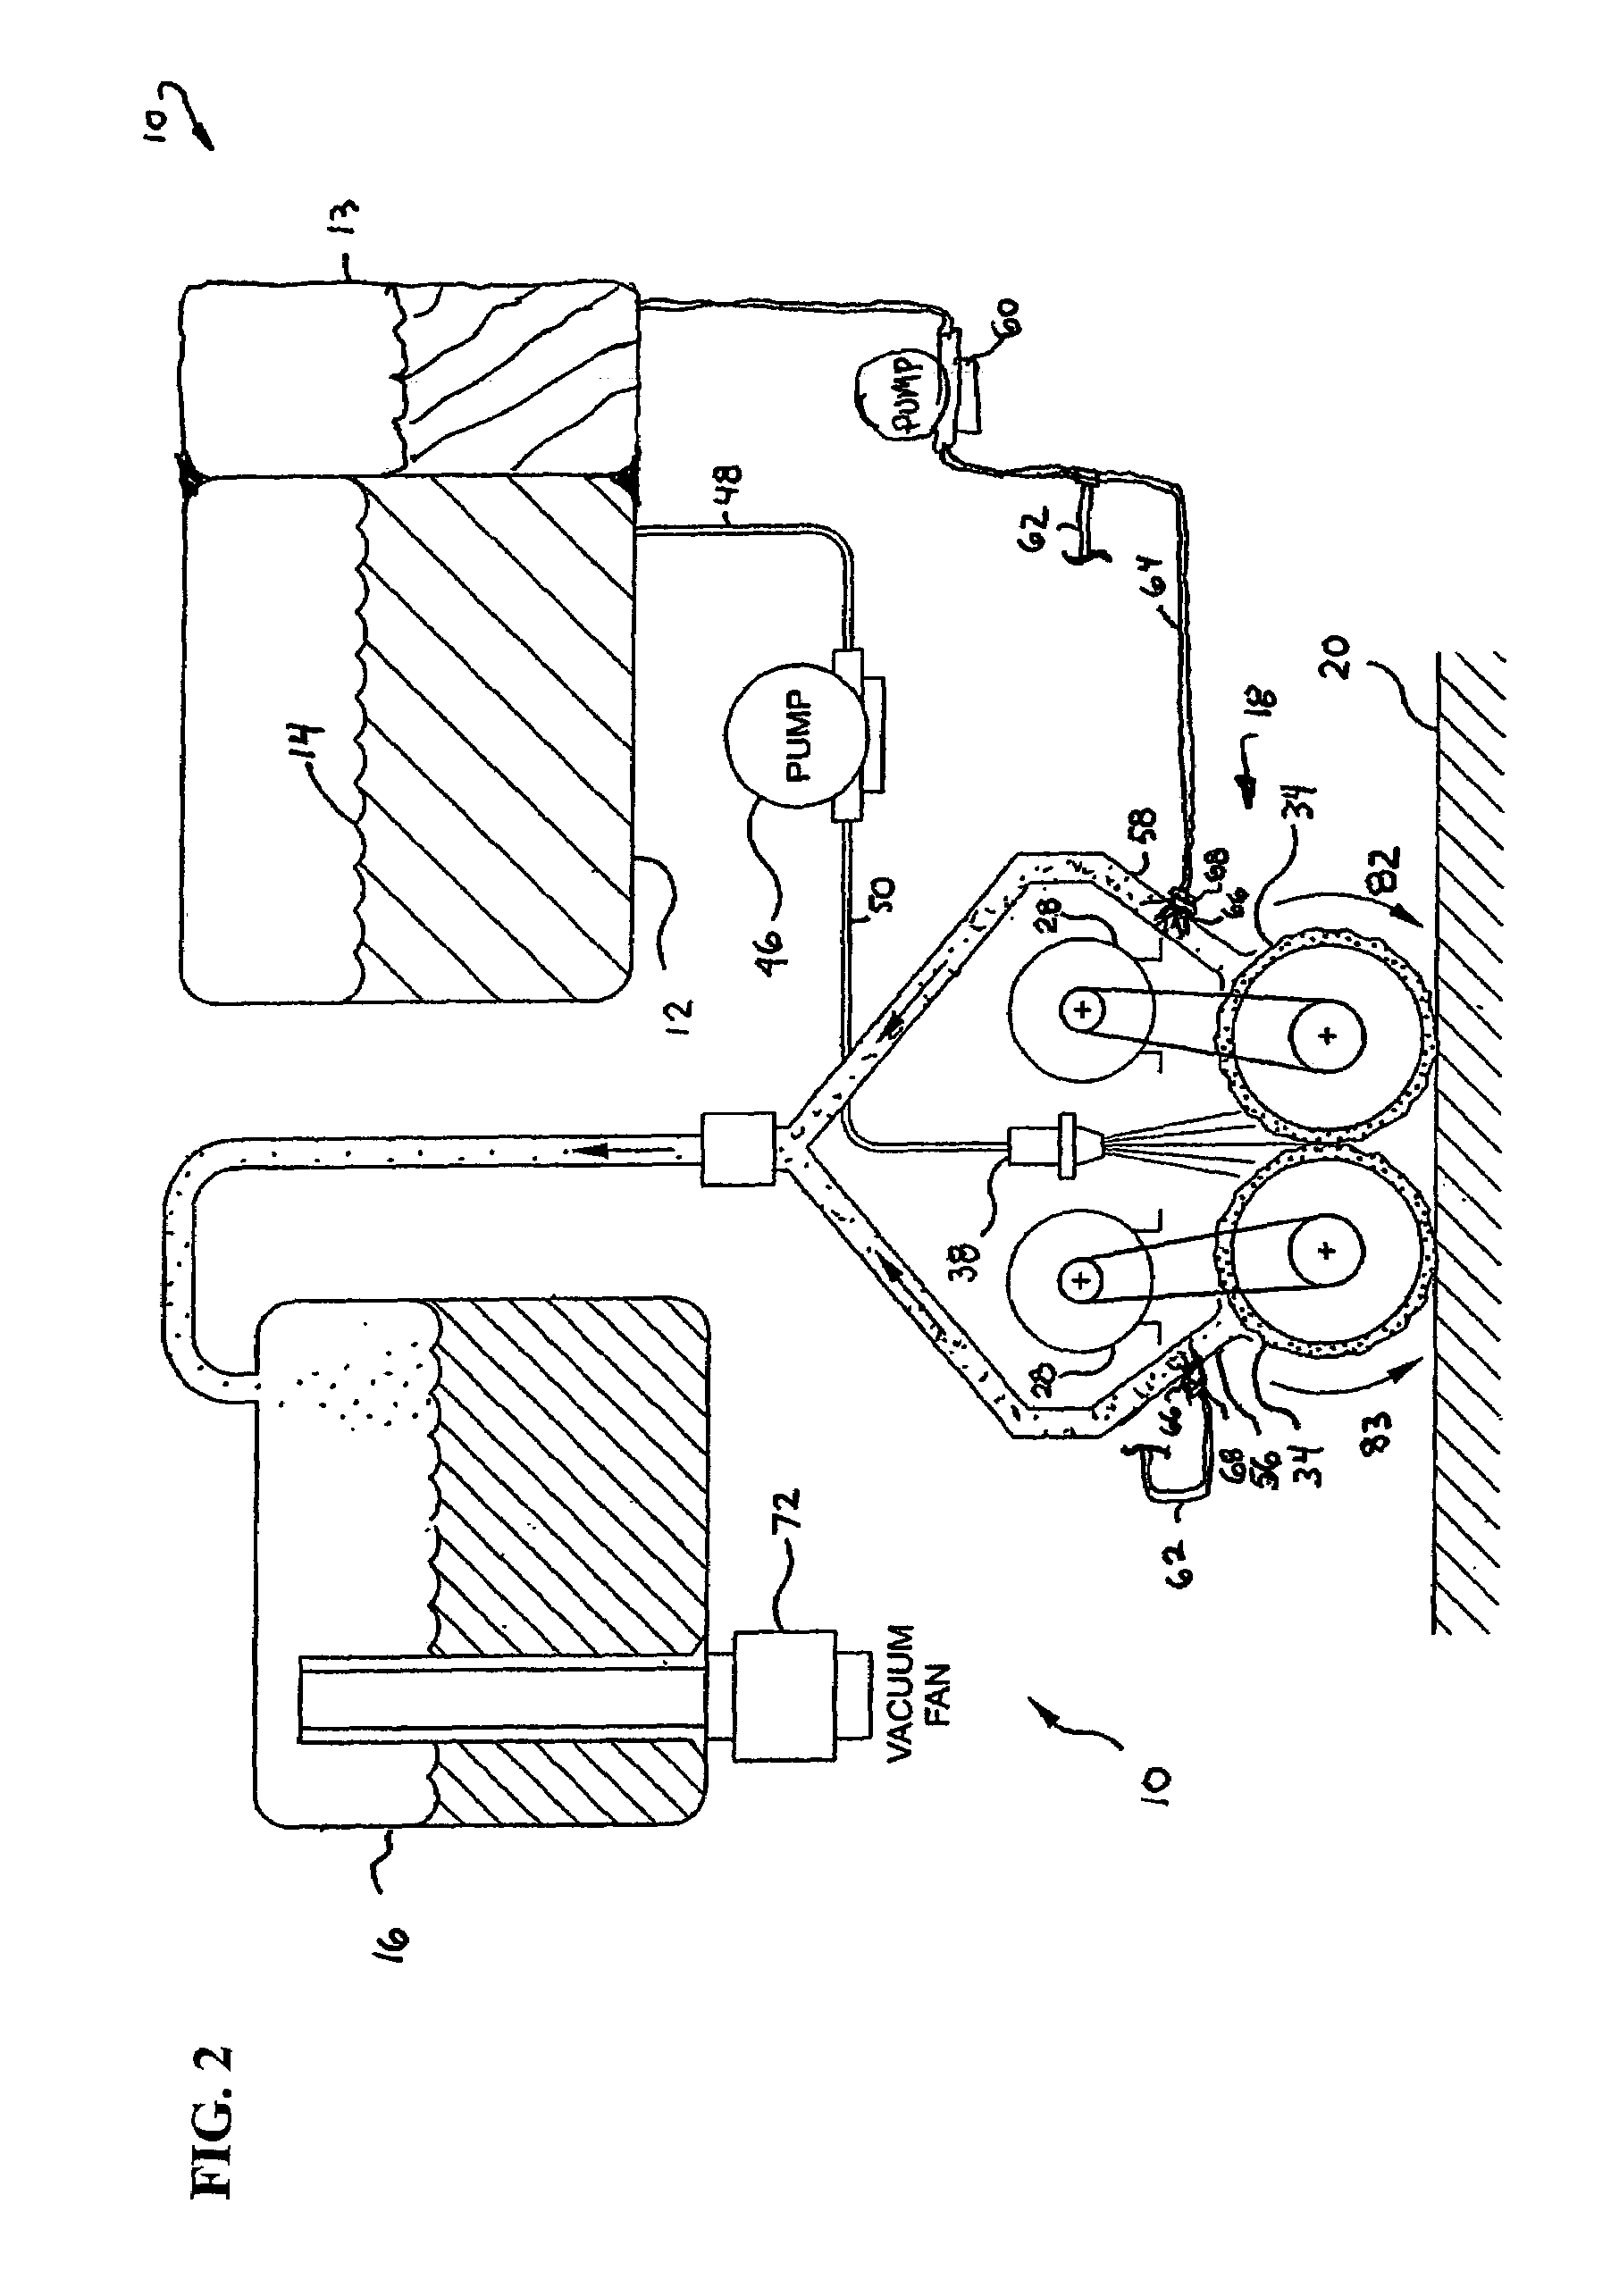 Secondary introduction of fluid into vacuum system